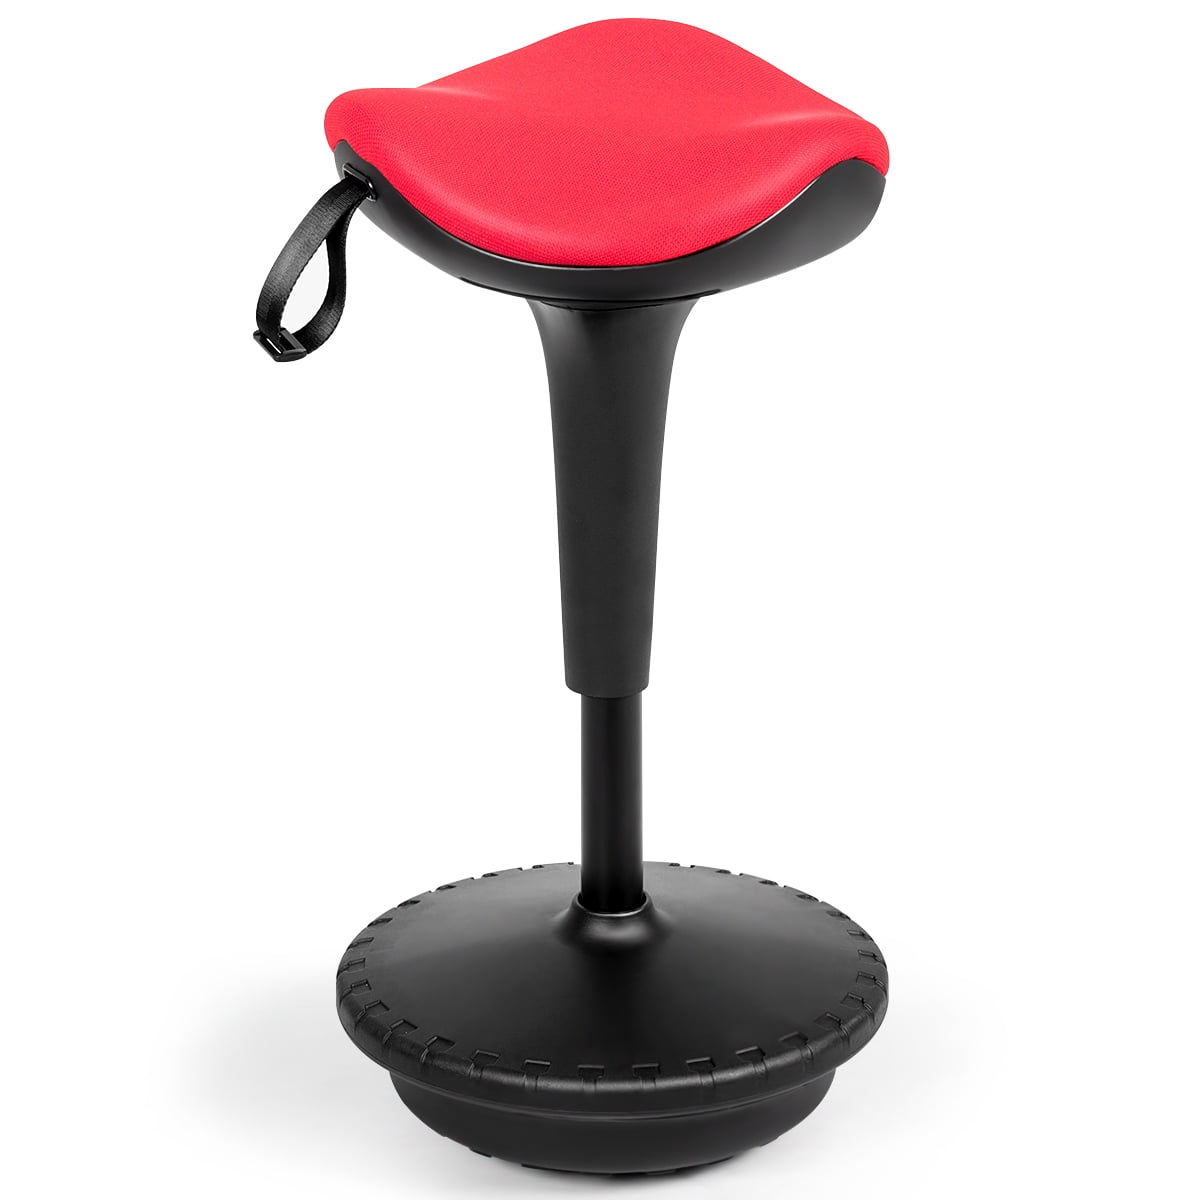 Wobble Stool Standing Desk Chair Height Adjustable Active Sitting Balance Chair 